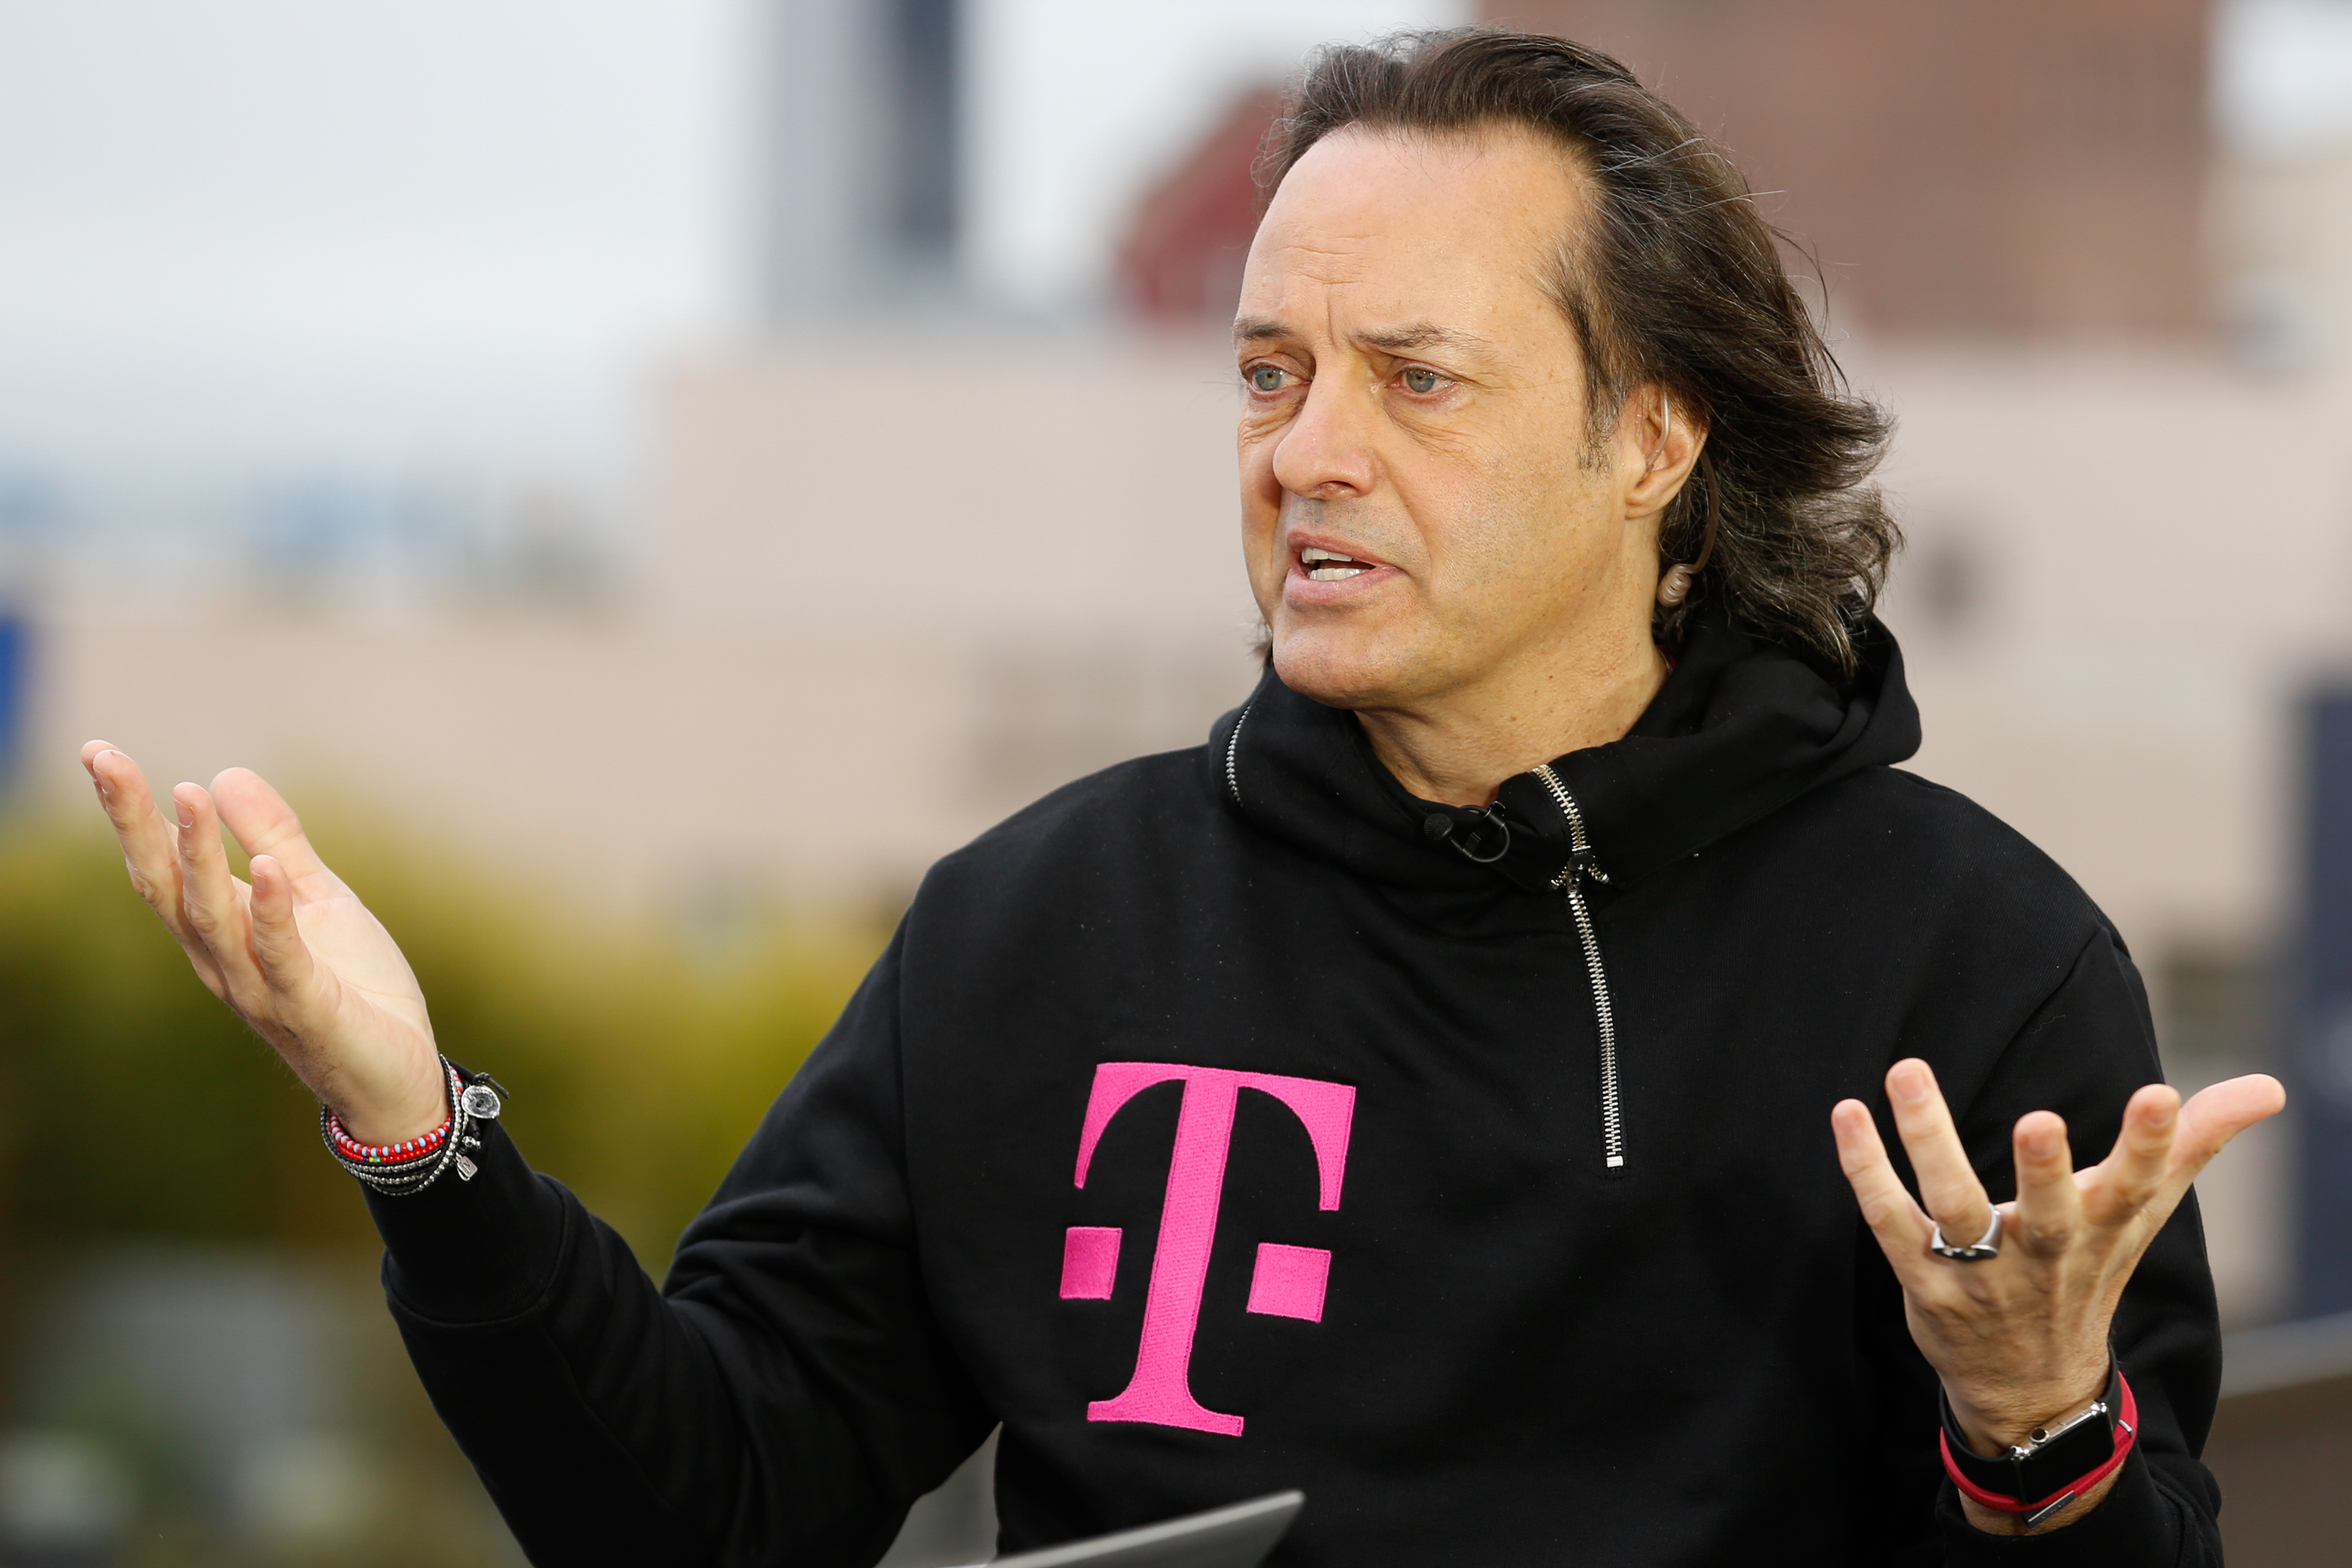 John Legere, CEO and President of T-Mobile US. (CNBC&mdash;2015 CNBC Media, LLC)